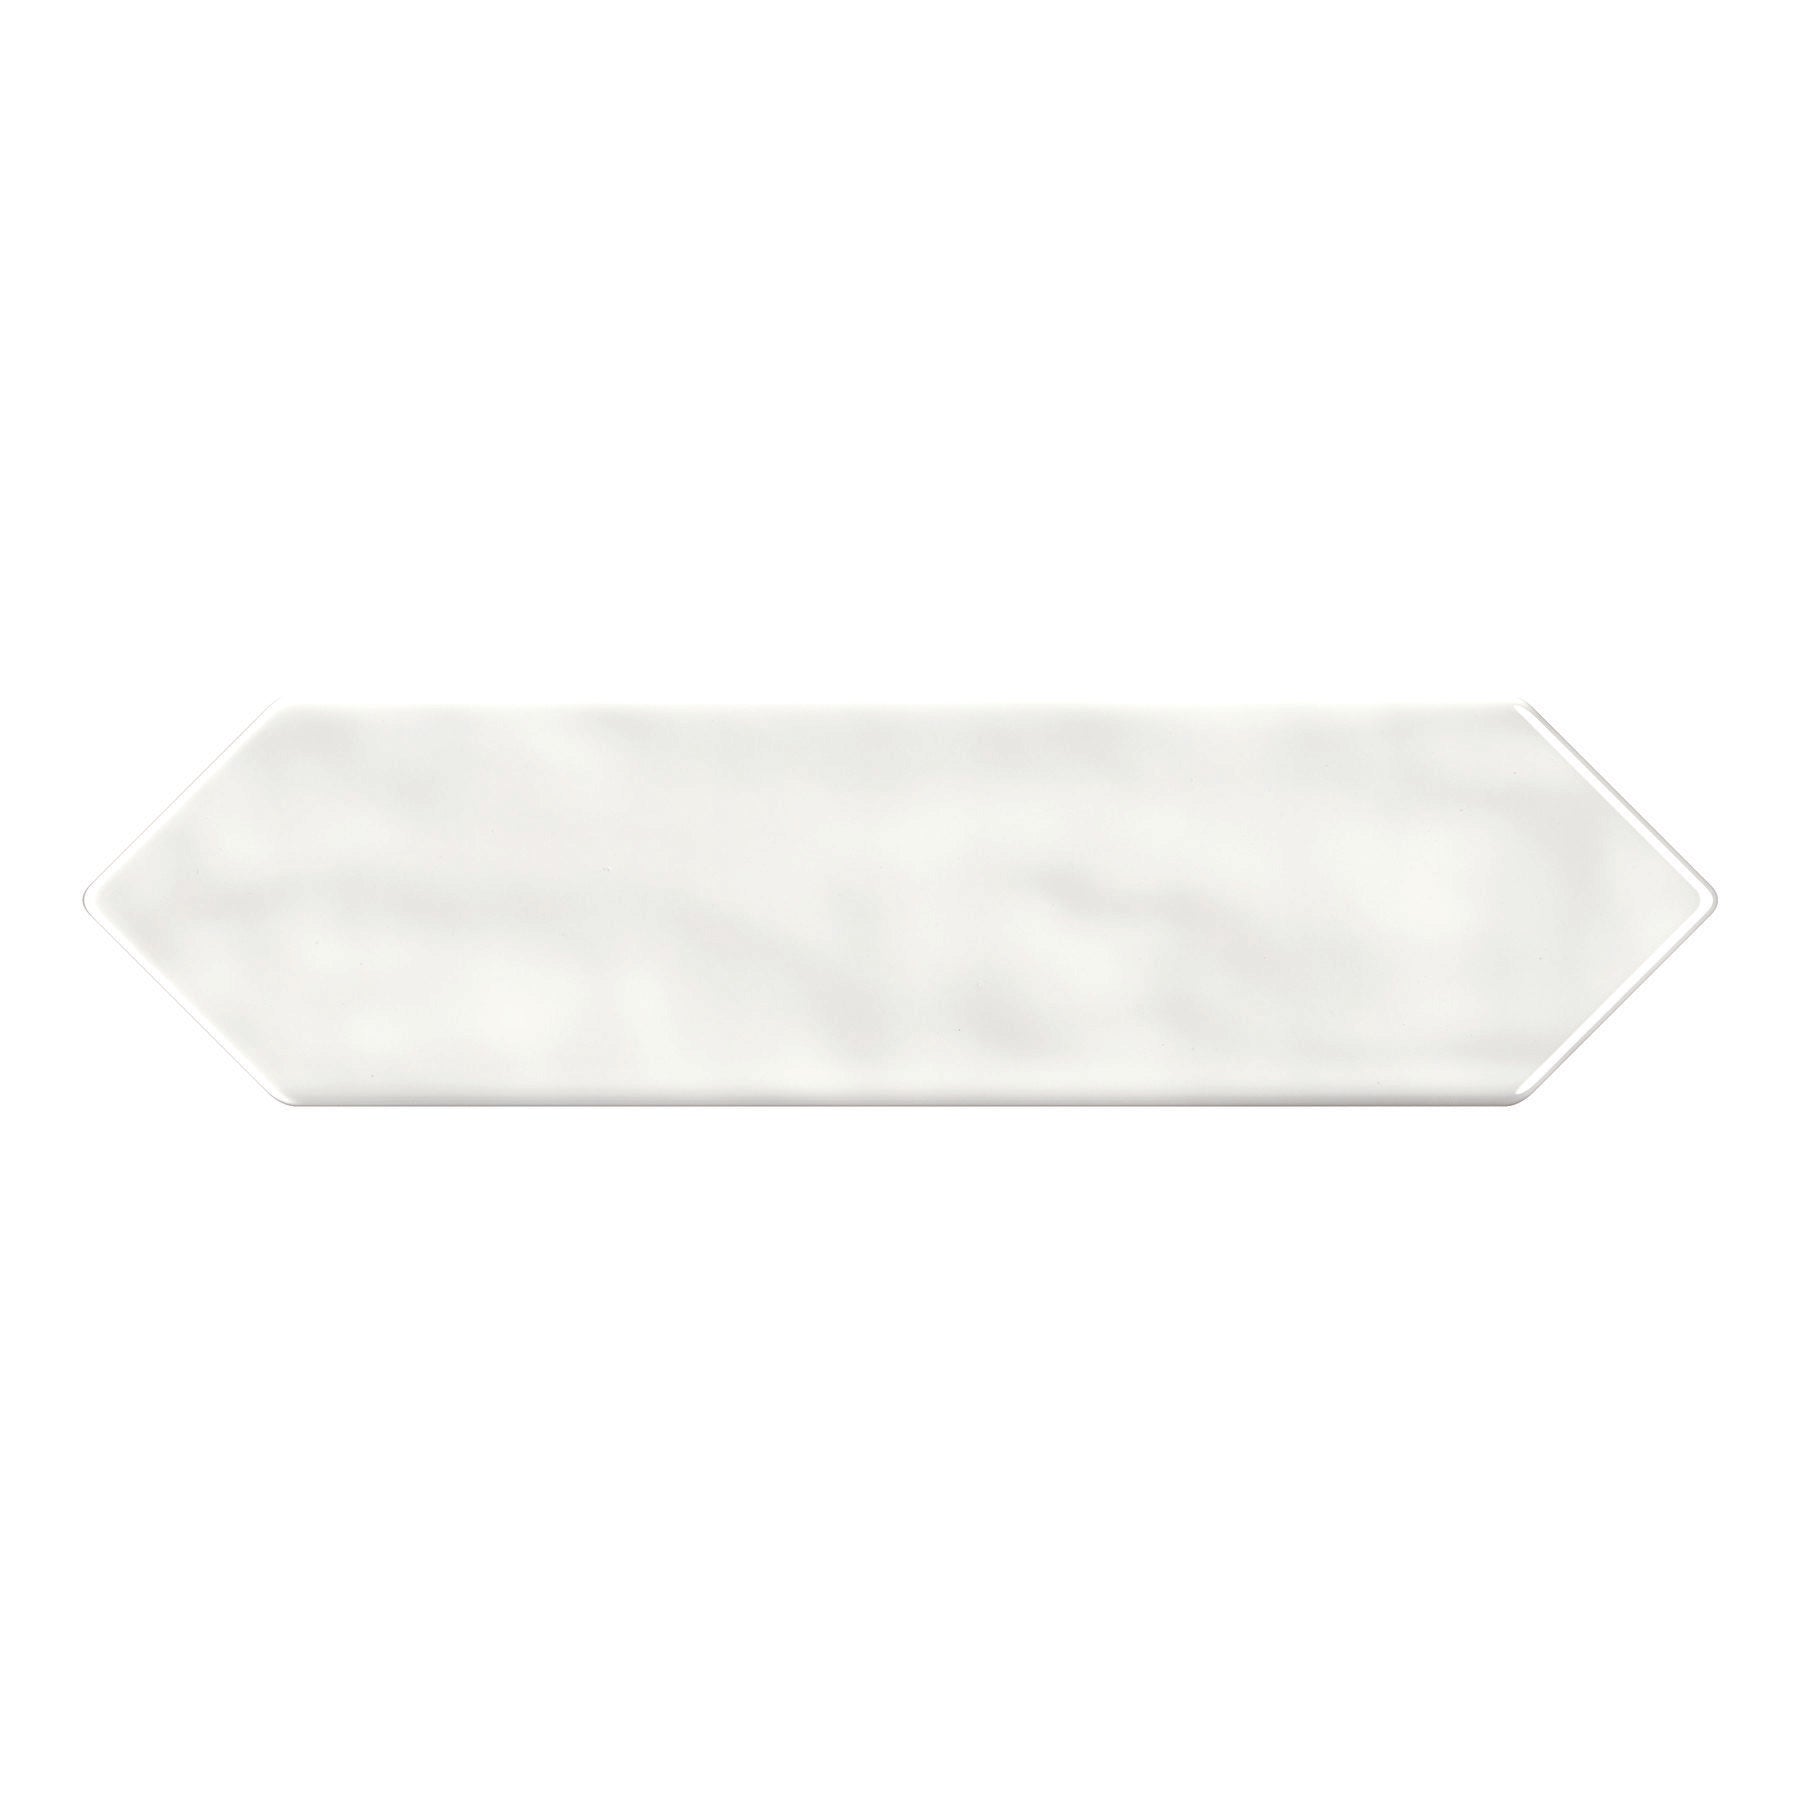 Daltile - Stagecraft - 3 in. x 12 in. Picket Wall Tile - Arctic White 0190